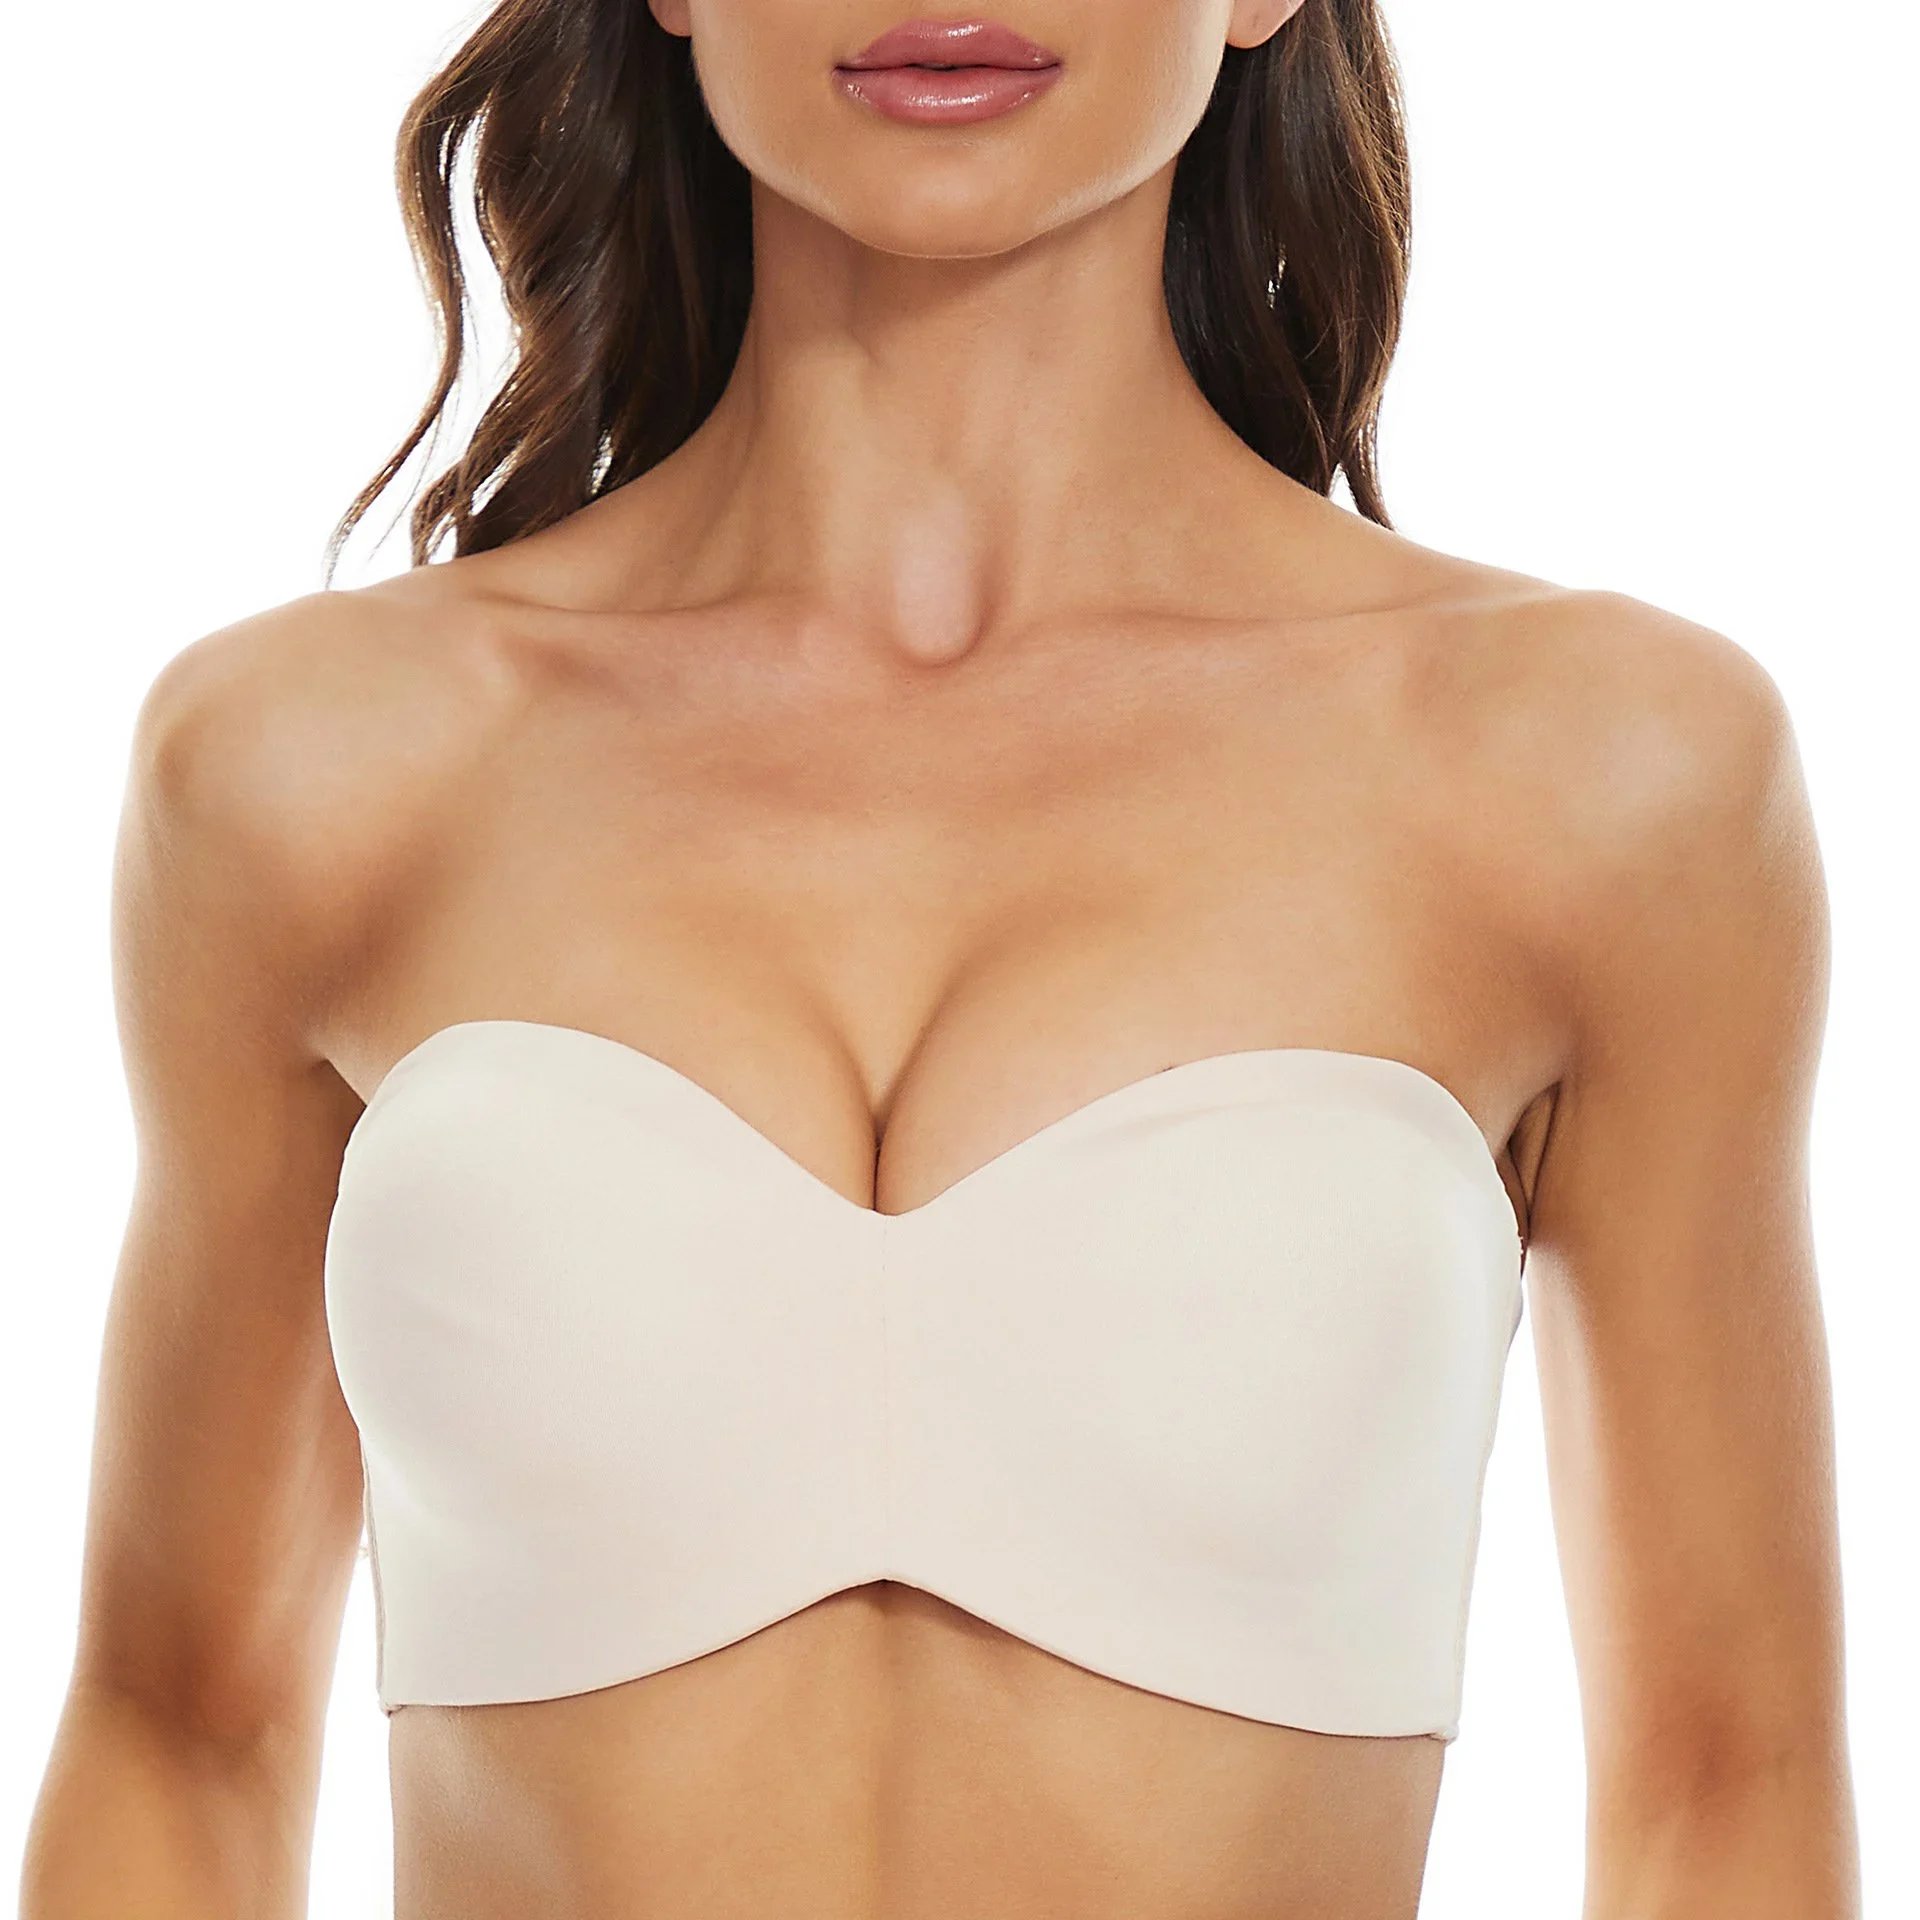 💕LAST DAY 49% OFF -🔥Full Support Non-Slip Convertible Bandeau Bra (Free Shipping)